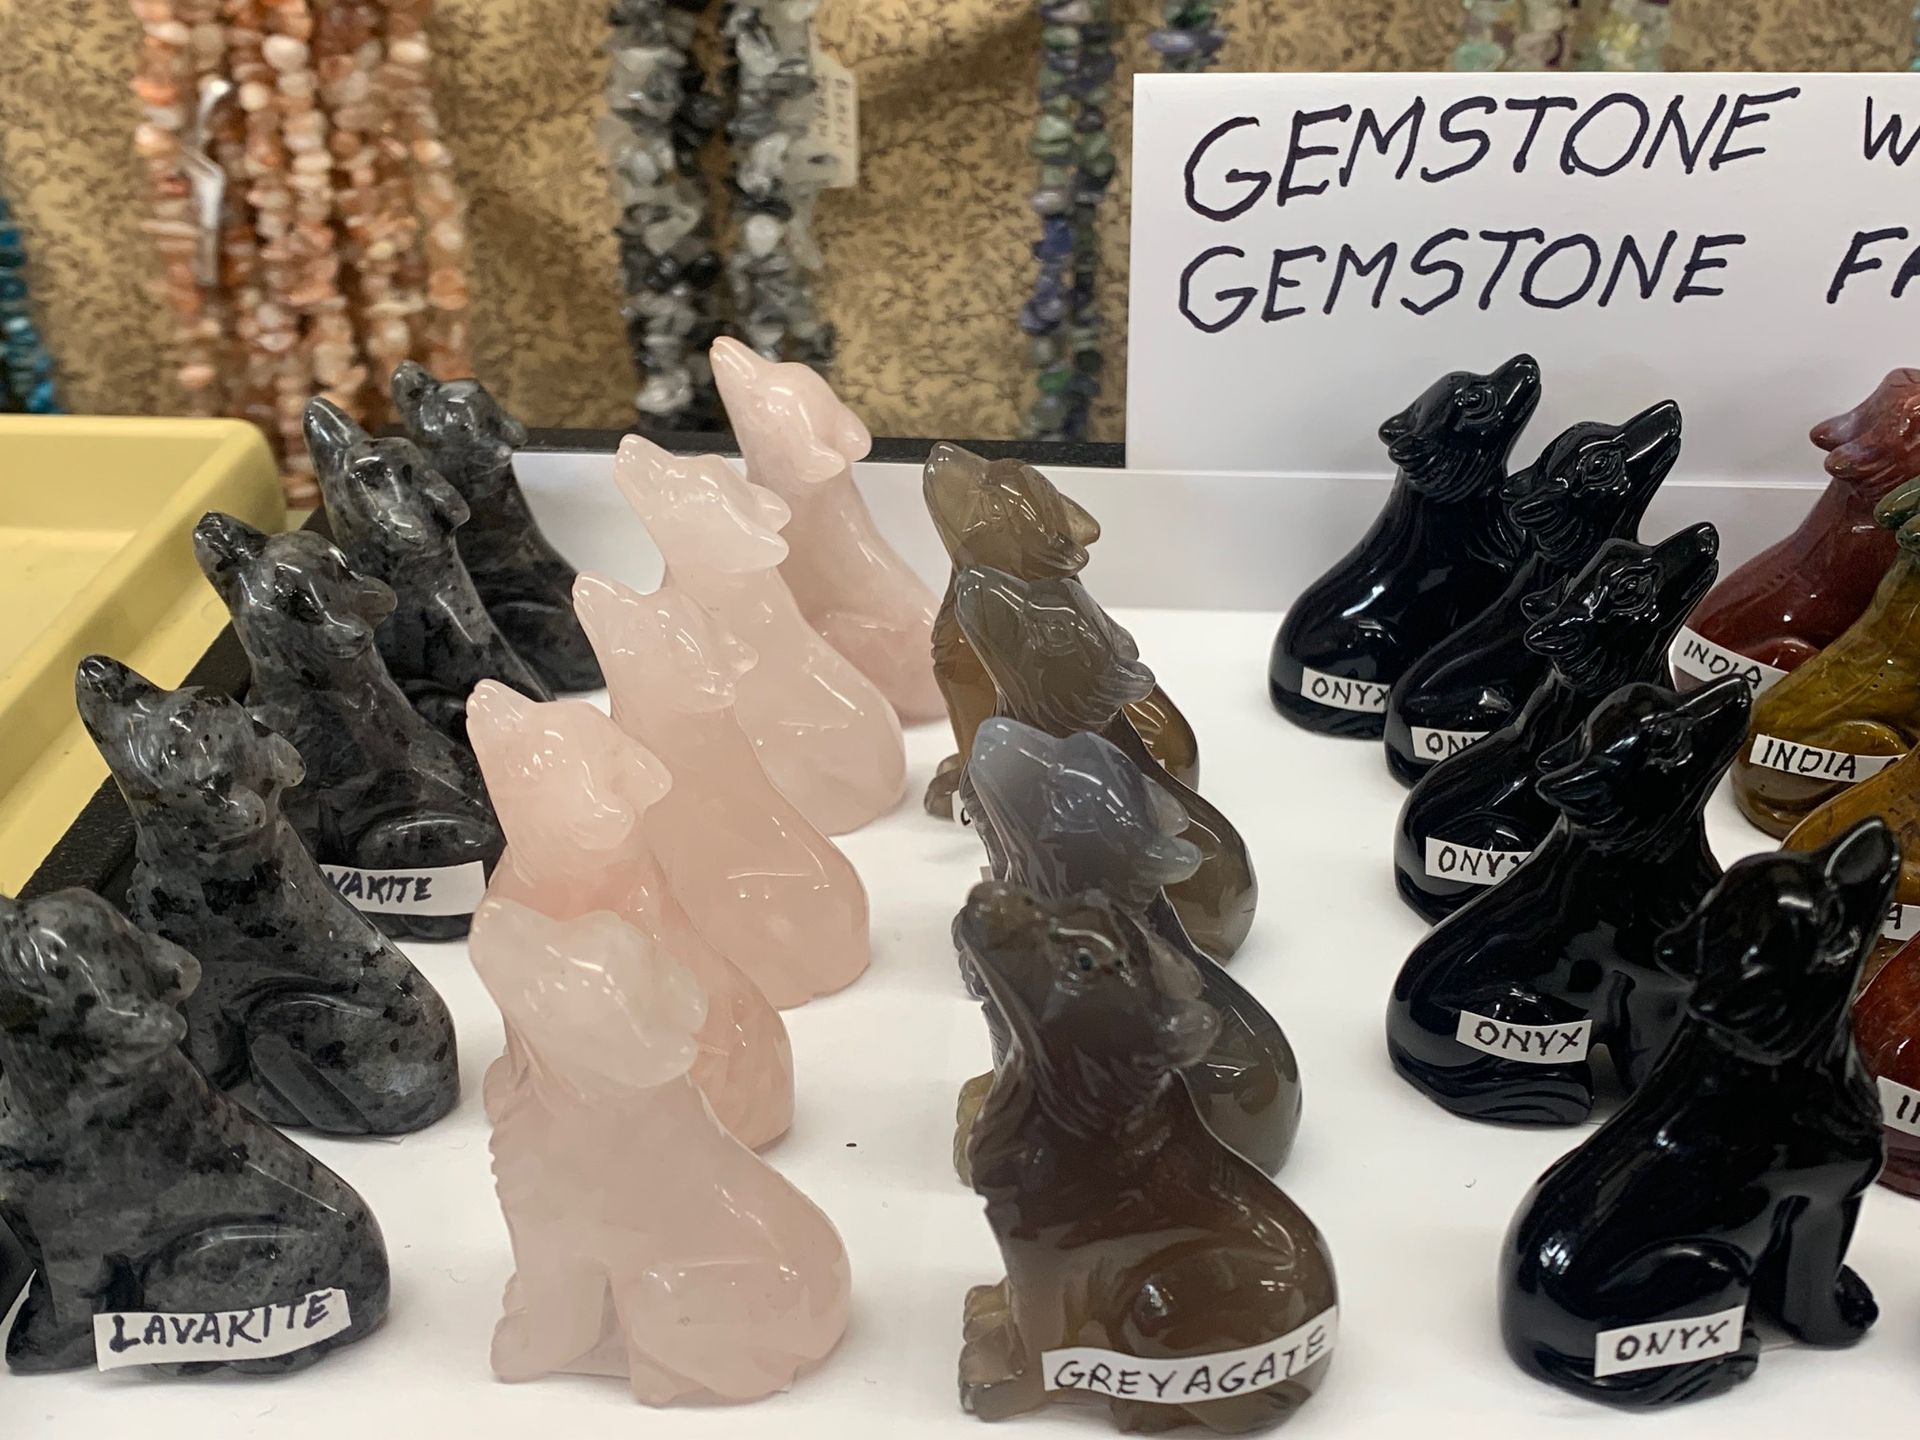 A table with a sign that says ' gemstone wolf ' on it